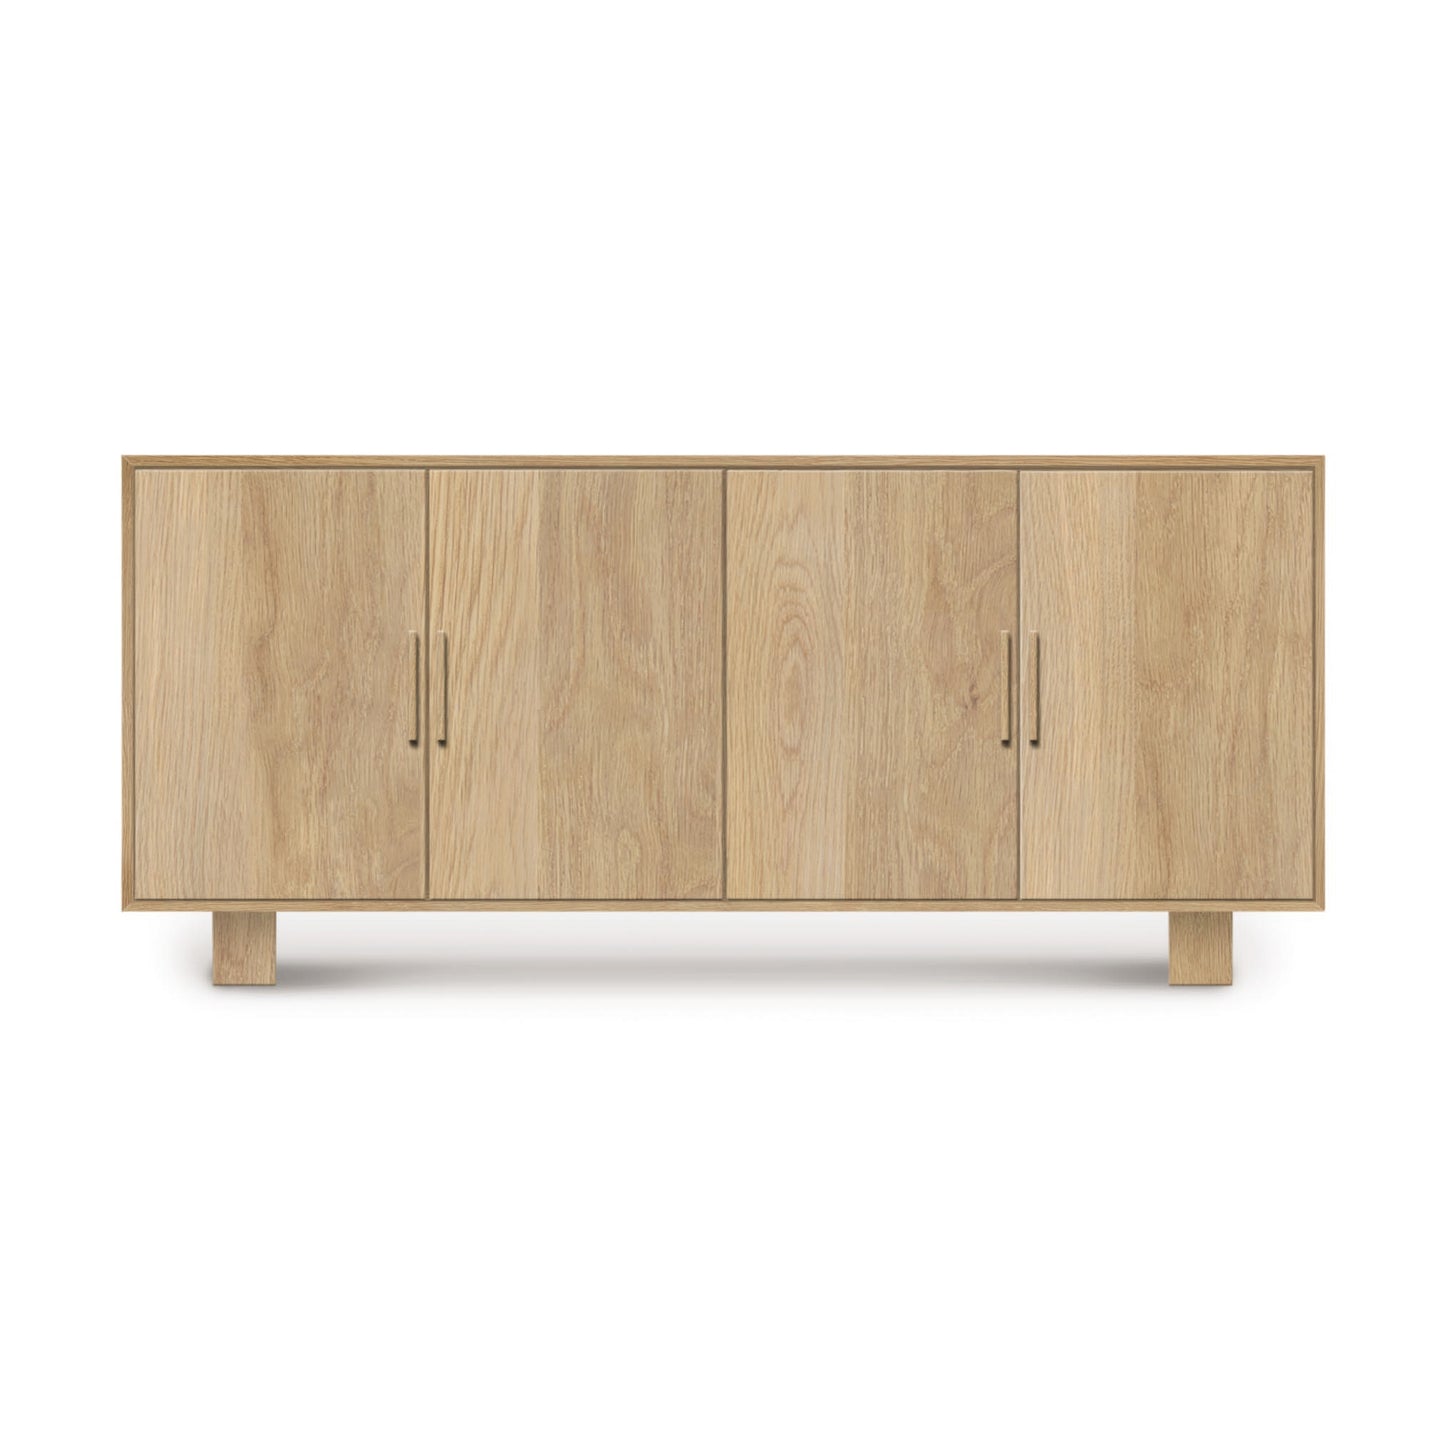 Copeland Furniture's Iso Oak 4-Door Buffet, a mid-century modern piece crafted from solid hardwood oak, with short legs, isolated on a white background.